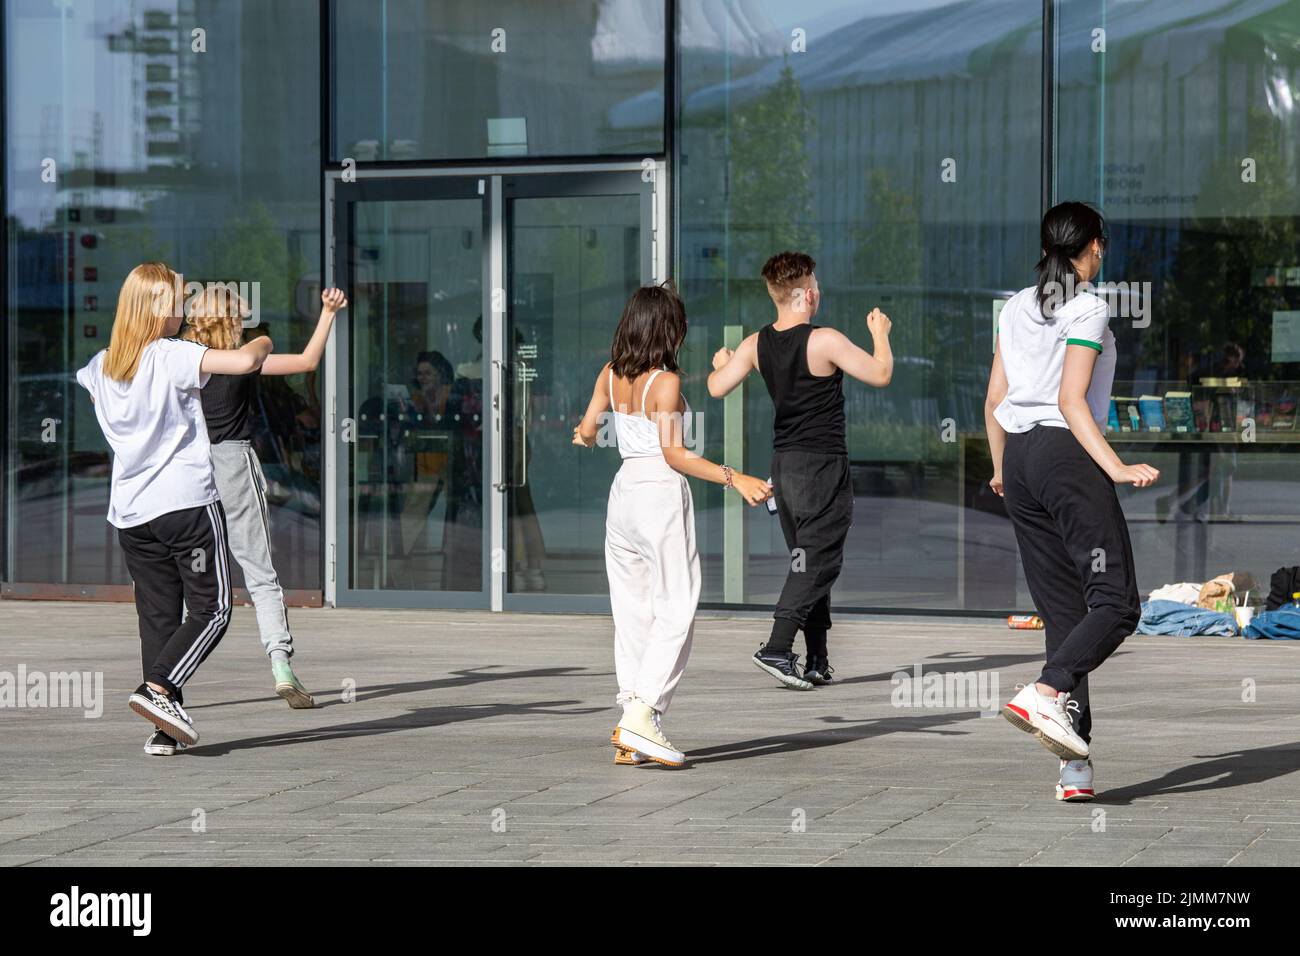 Teenagers or young adults practising dance moves in front of Oodi library in Helsinki, Finland Stock Photo